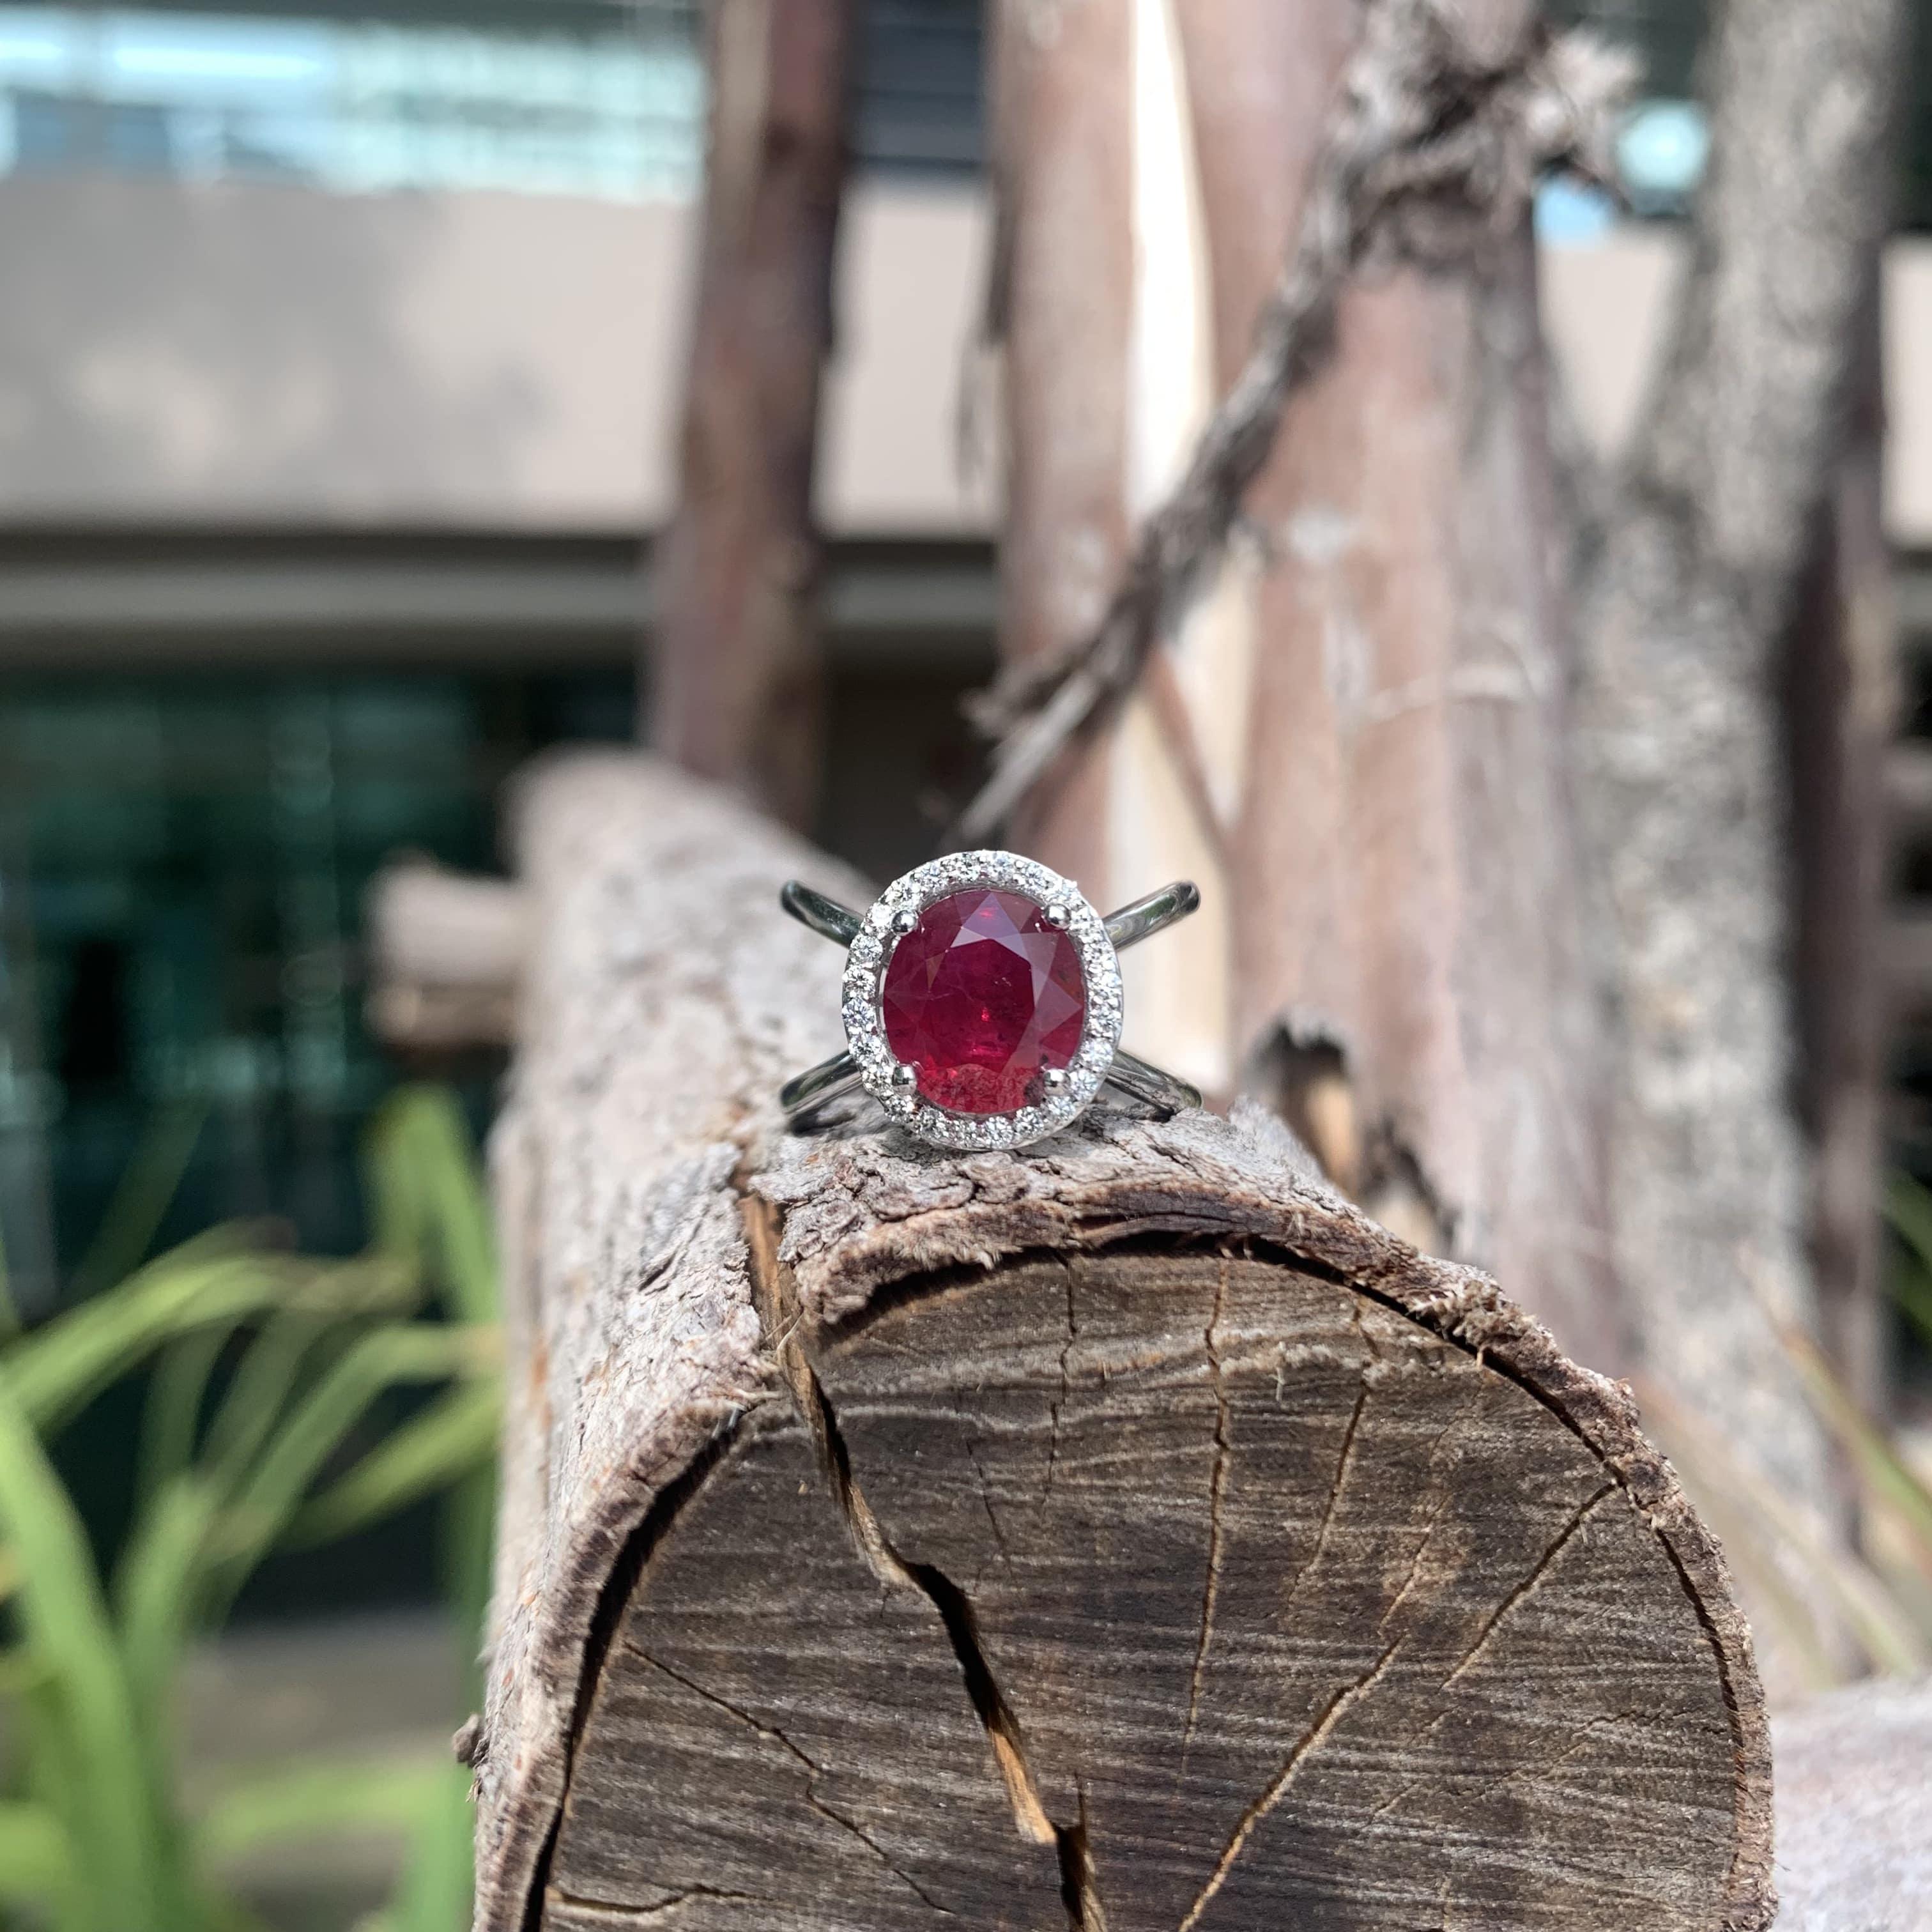 At the heart of this exquisite ring lies a mesmerizing 3.23 Carat Ruby, radiating a rich and deep red hue that symbolizes passion and elegance. Originating from Mozambique, the Ruby boasts a resplendent pigeon blood hue, radiating an irresistible